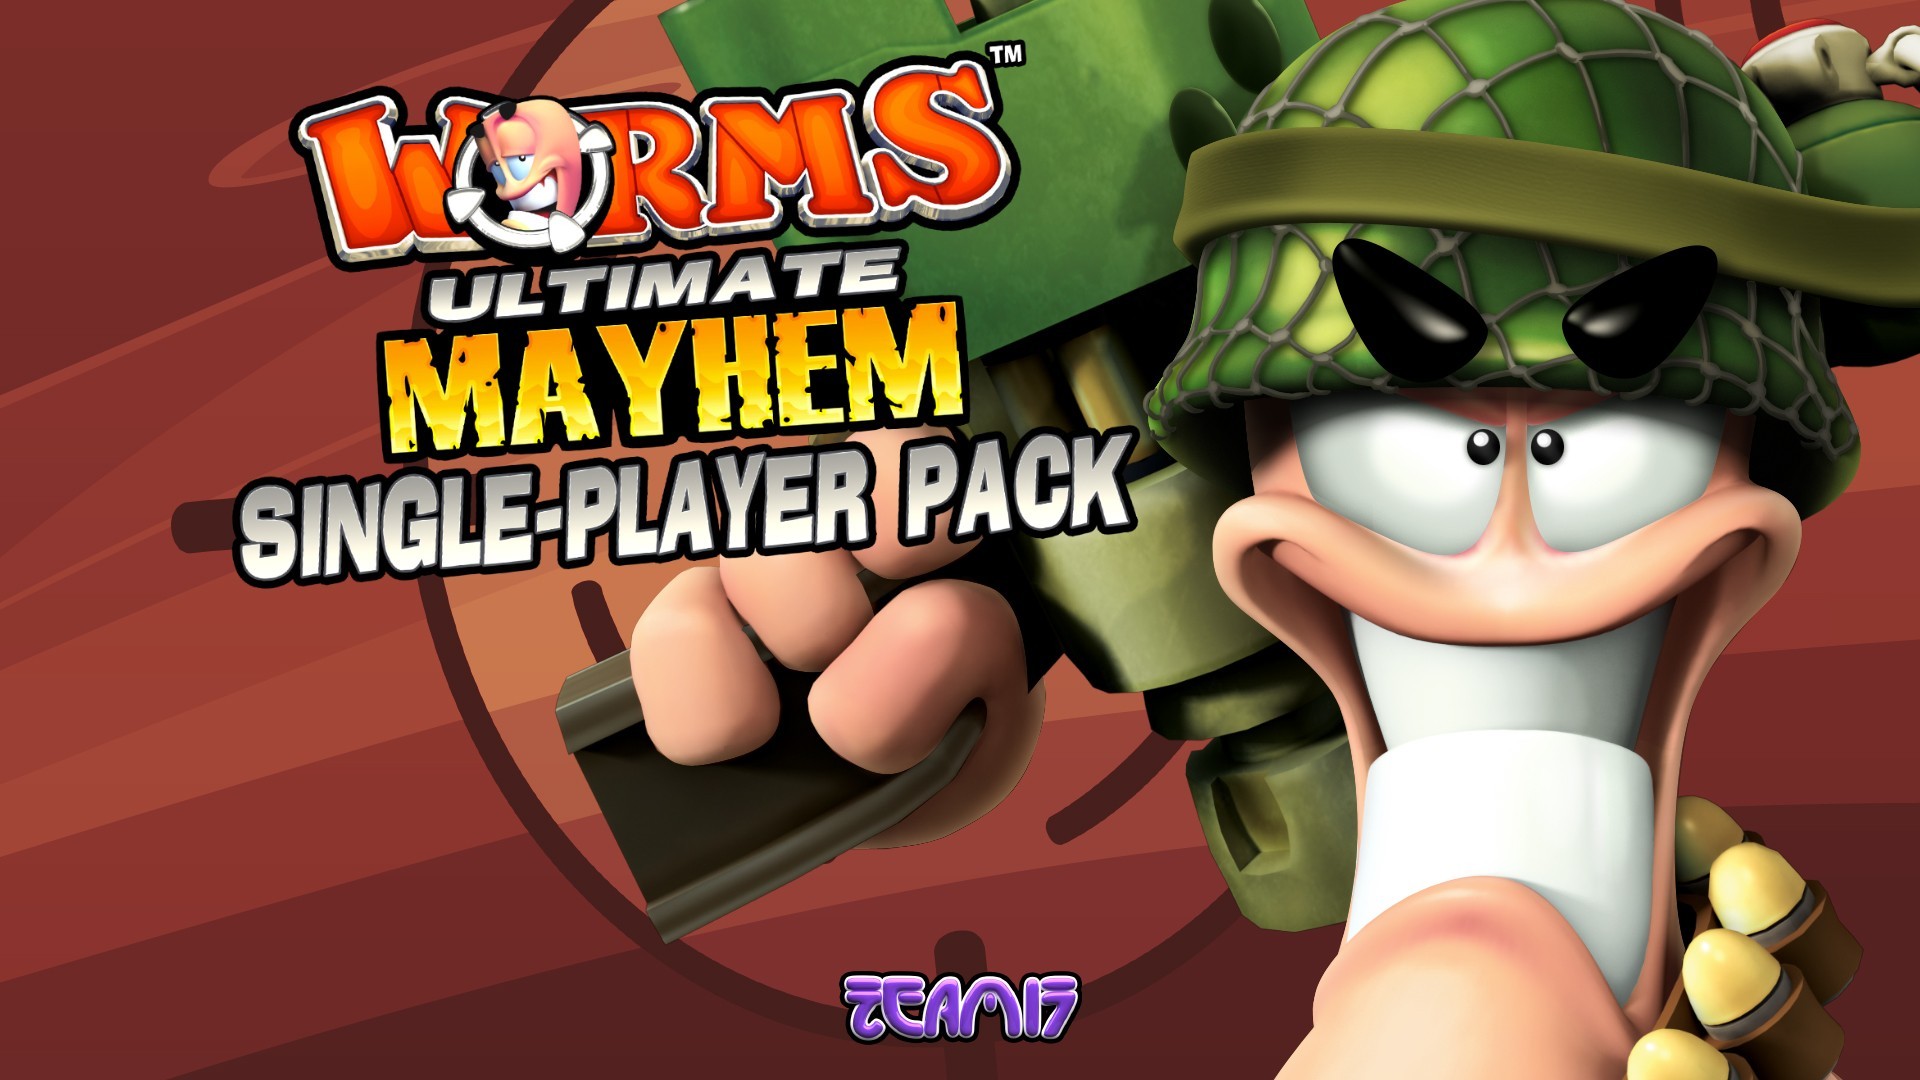 General 1920x1080 Worms video games Worms Ultimate Mayhem Team 17